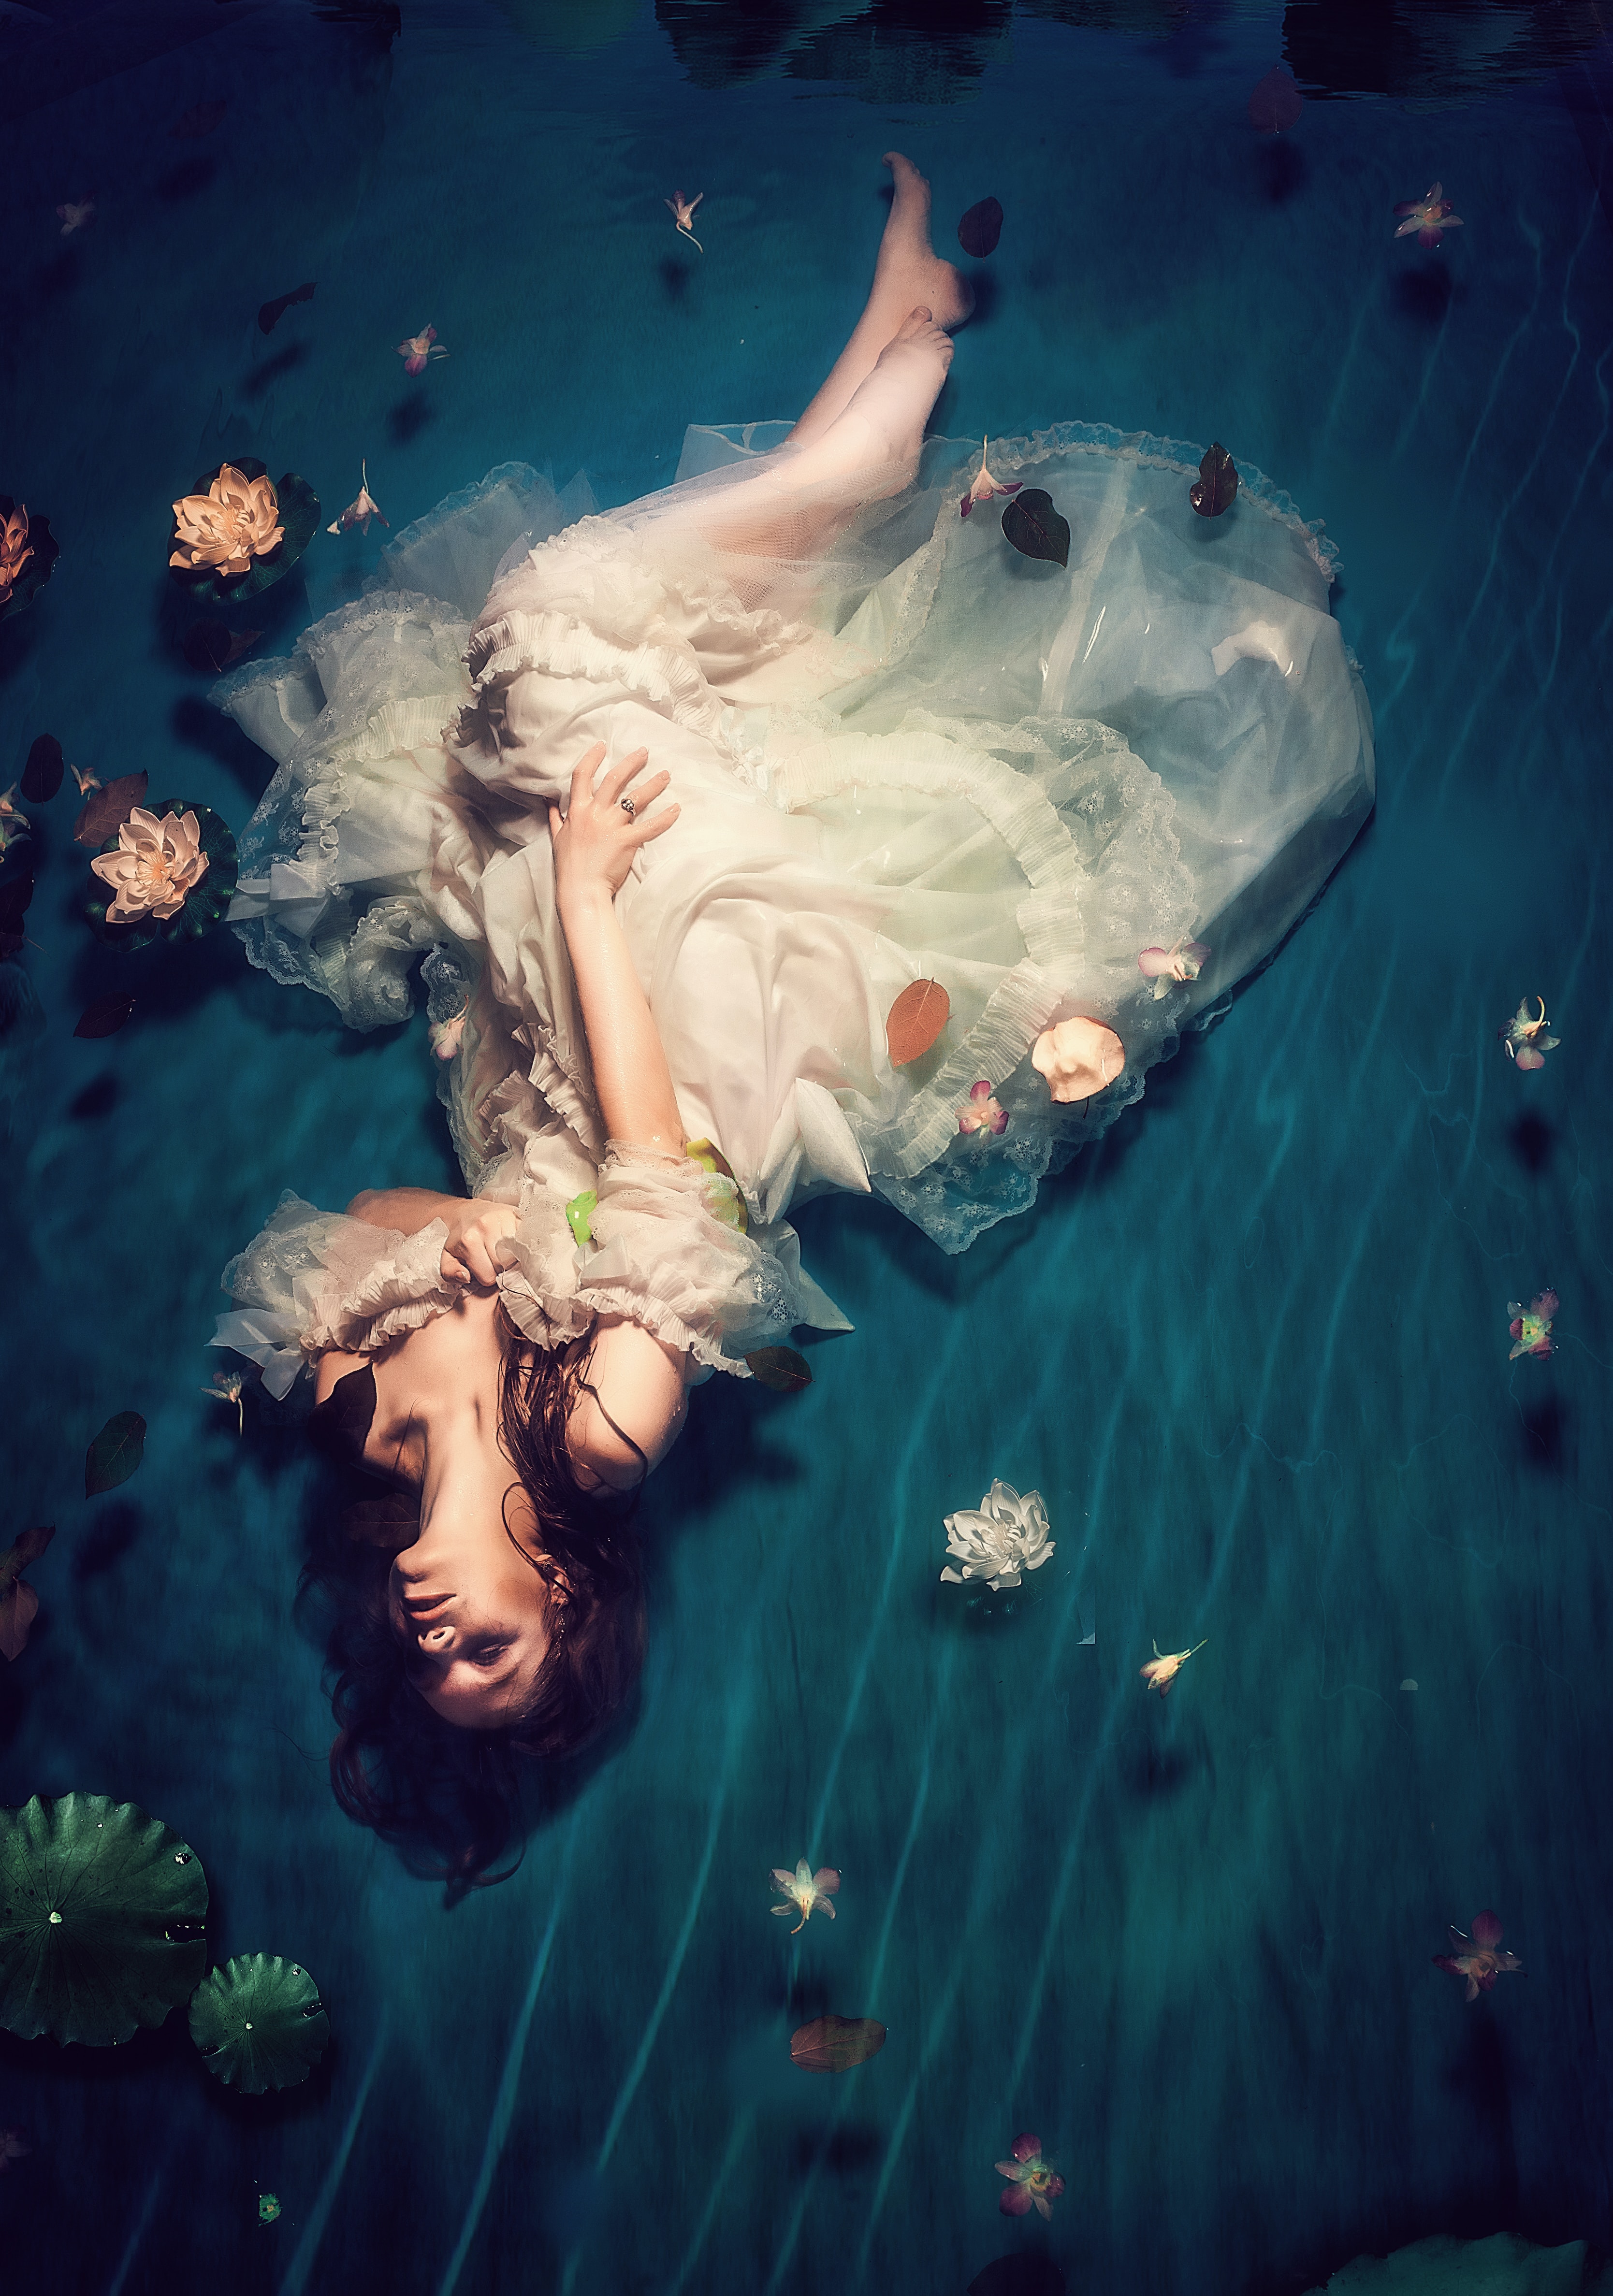 Woman in a white whimsical dress lying-in shallow water with flowers scattered around her.